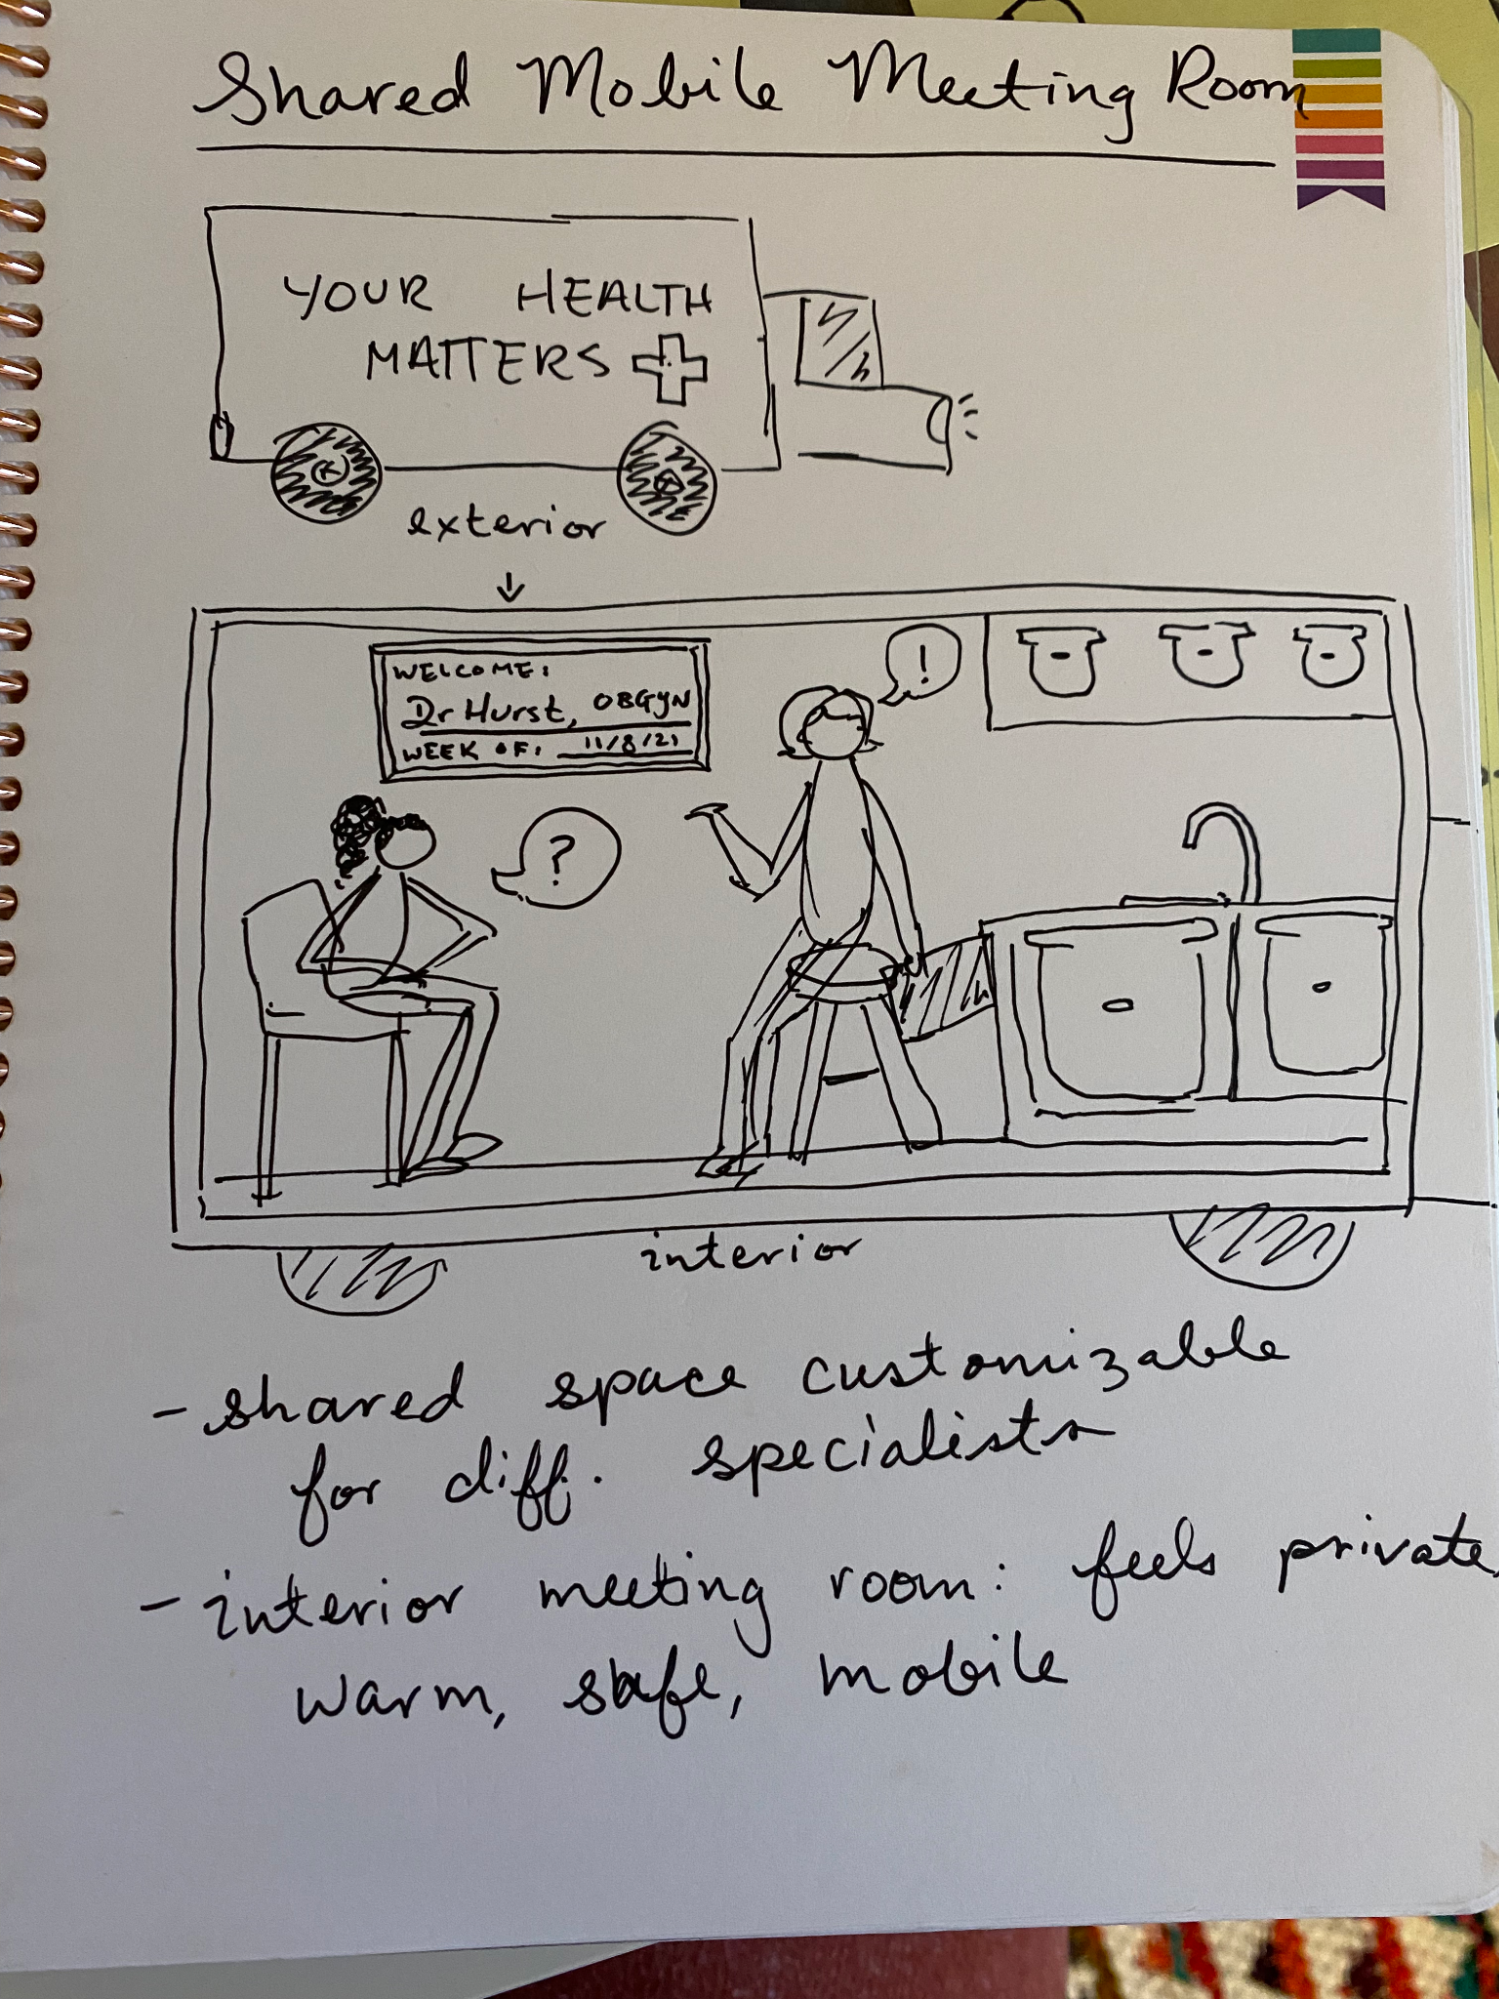 Sketch of shared mobile meeting room